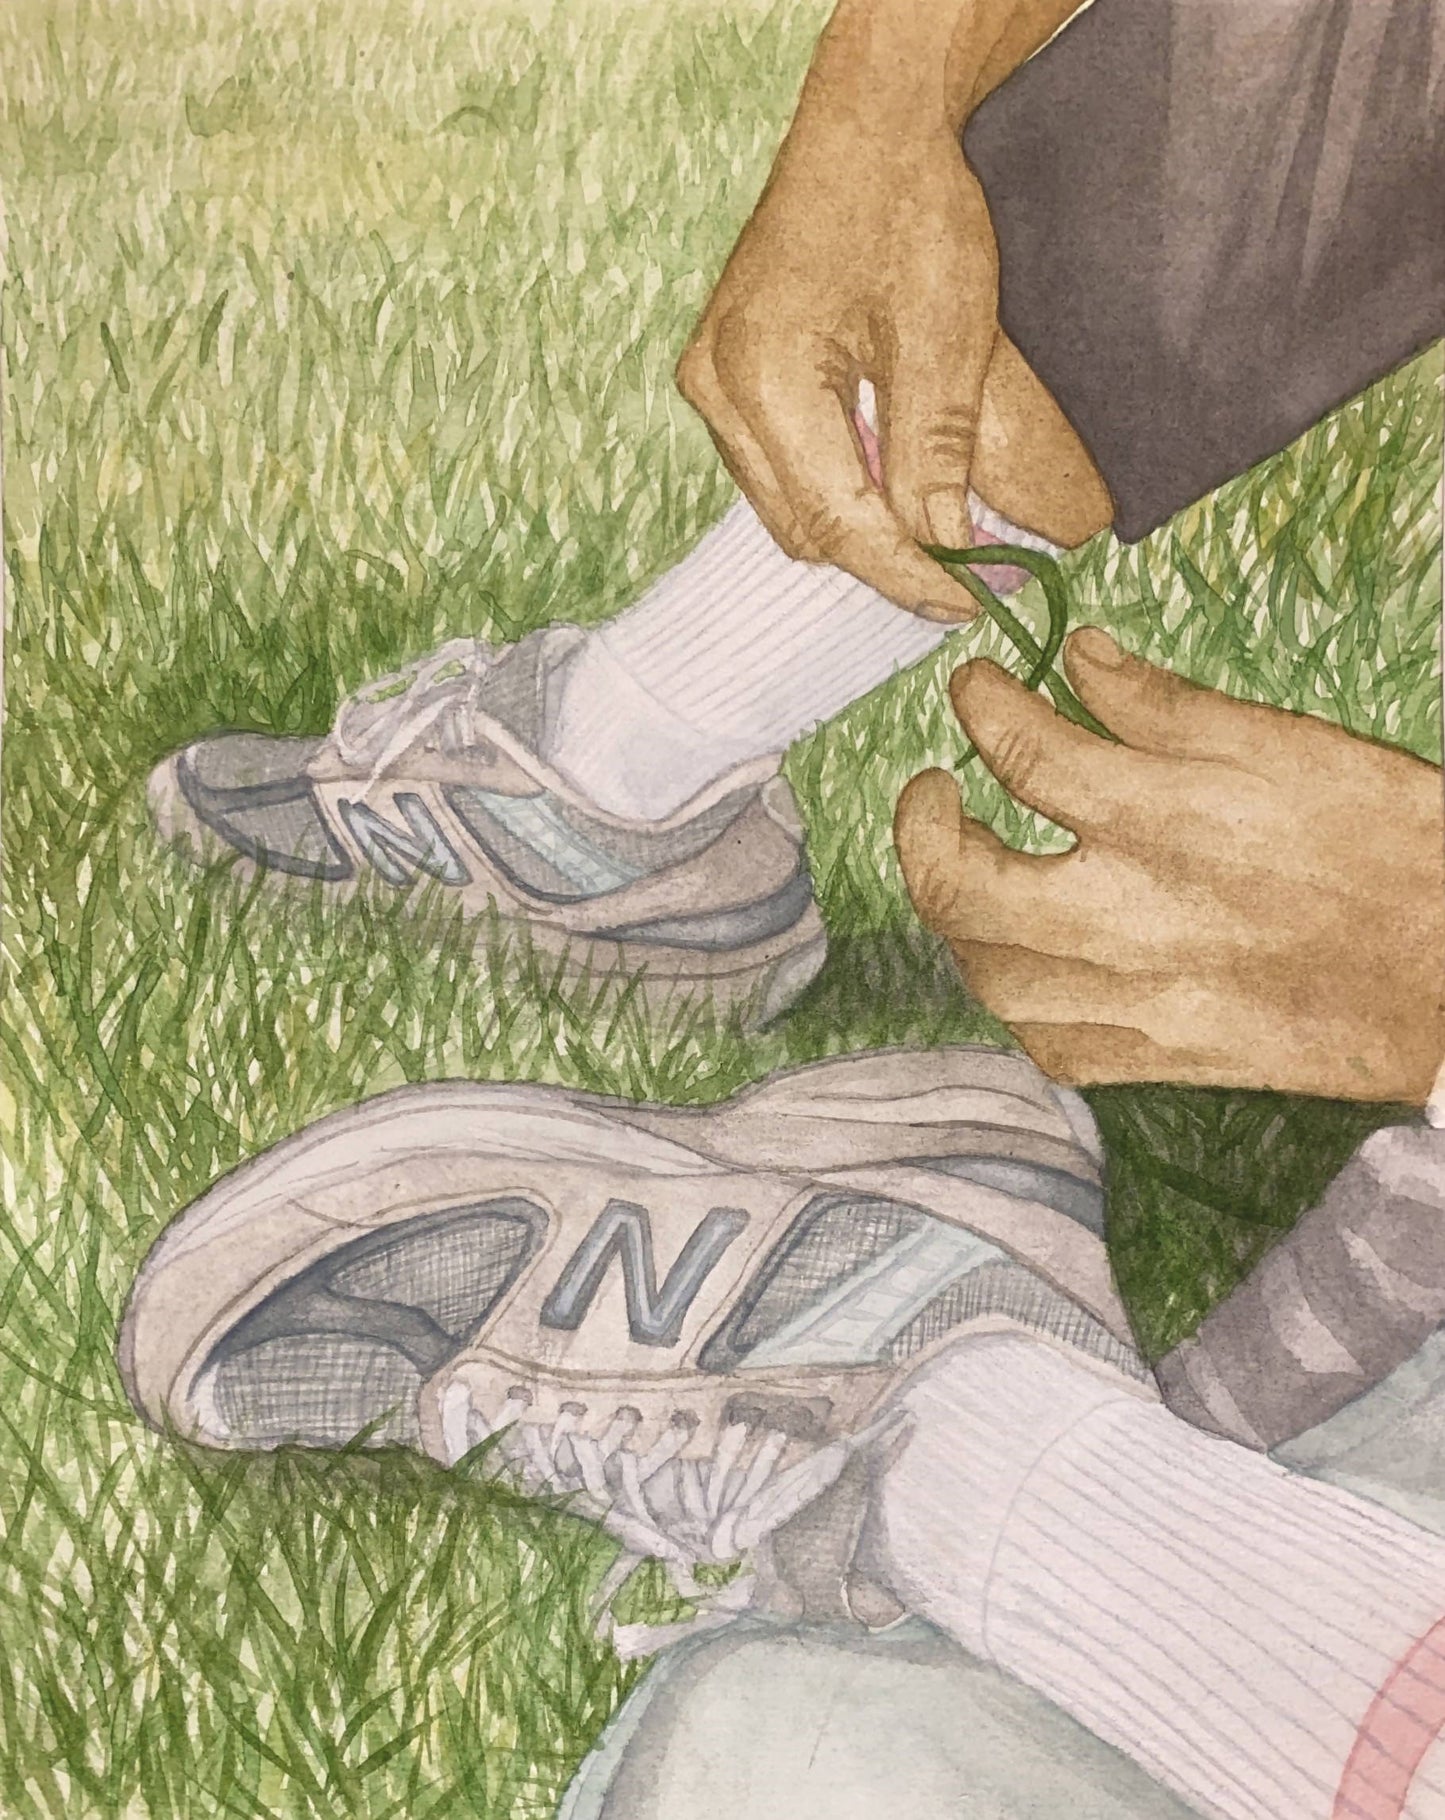 990 Shoes on Grass, Giclee Print